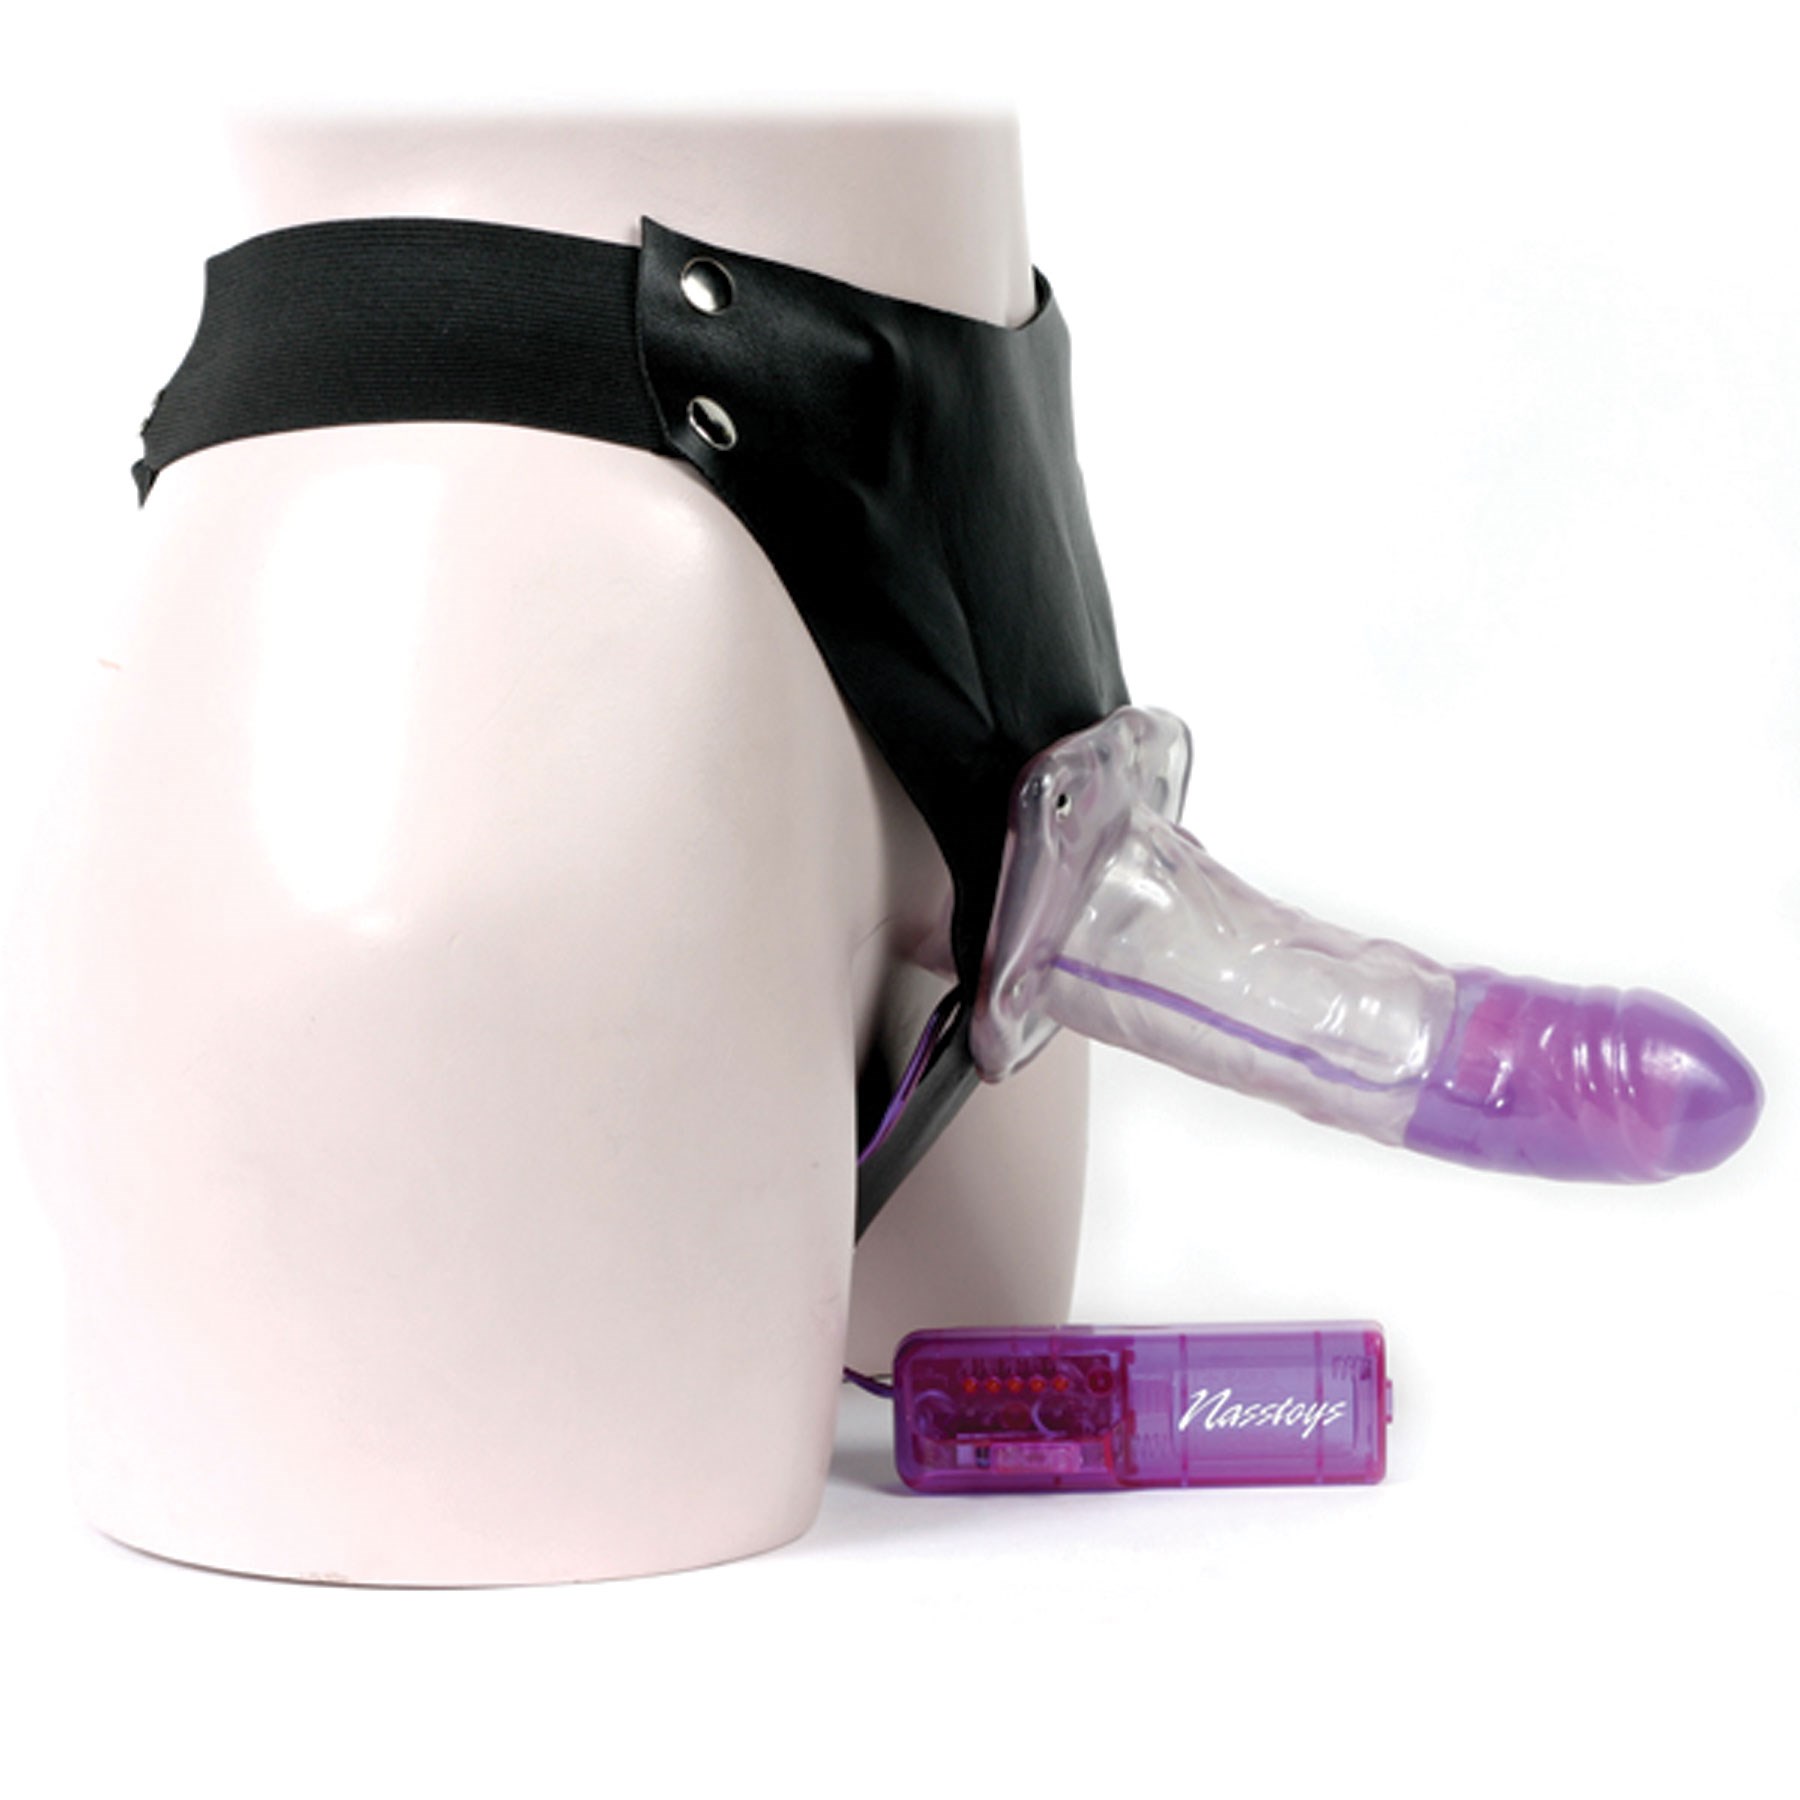 Jelly Power Strap-On side view